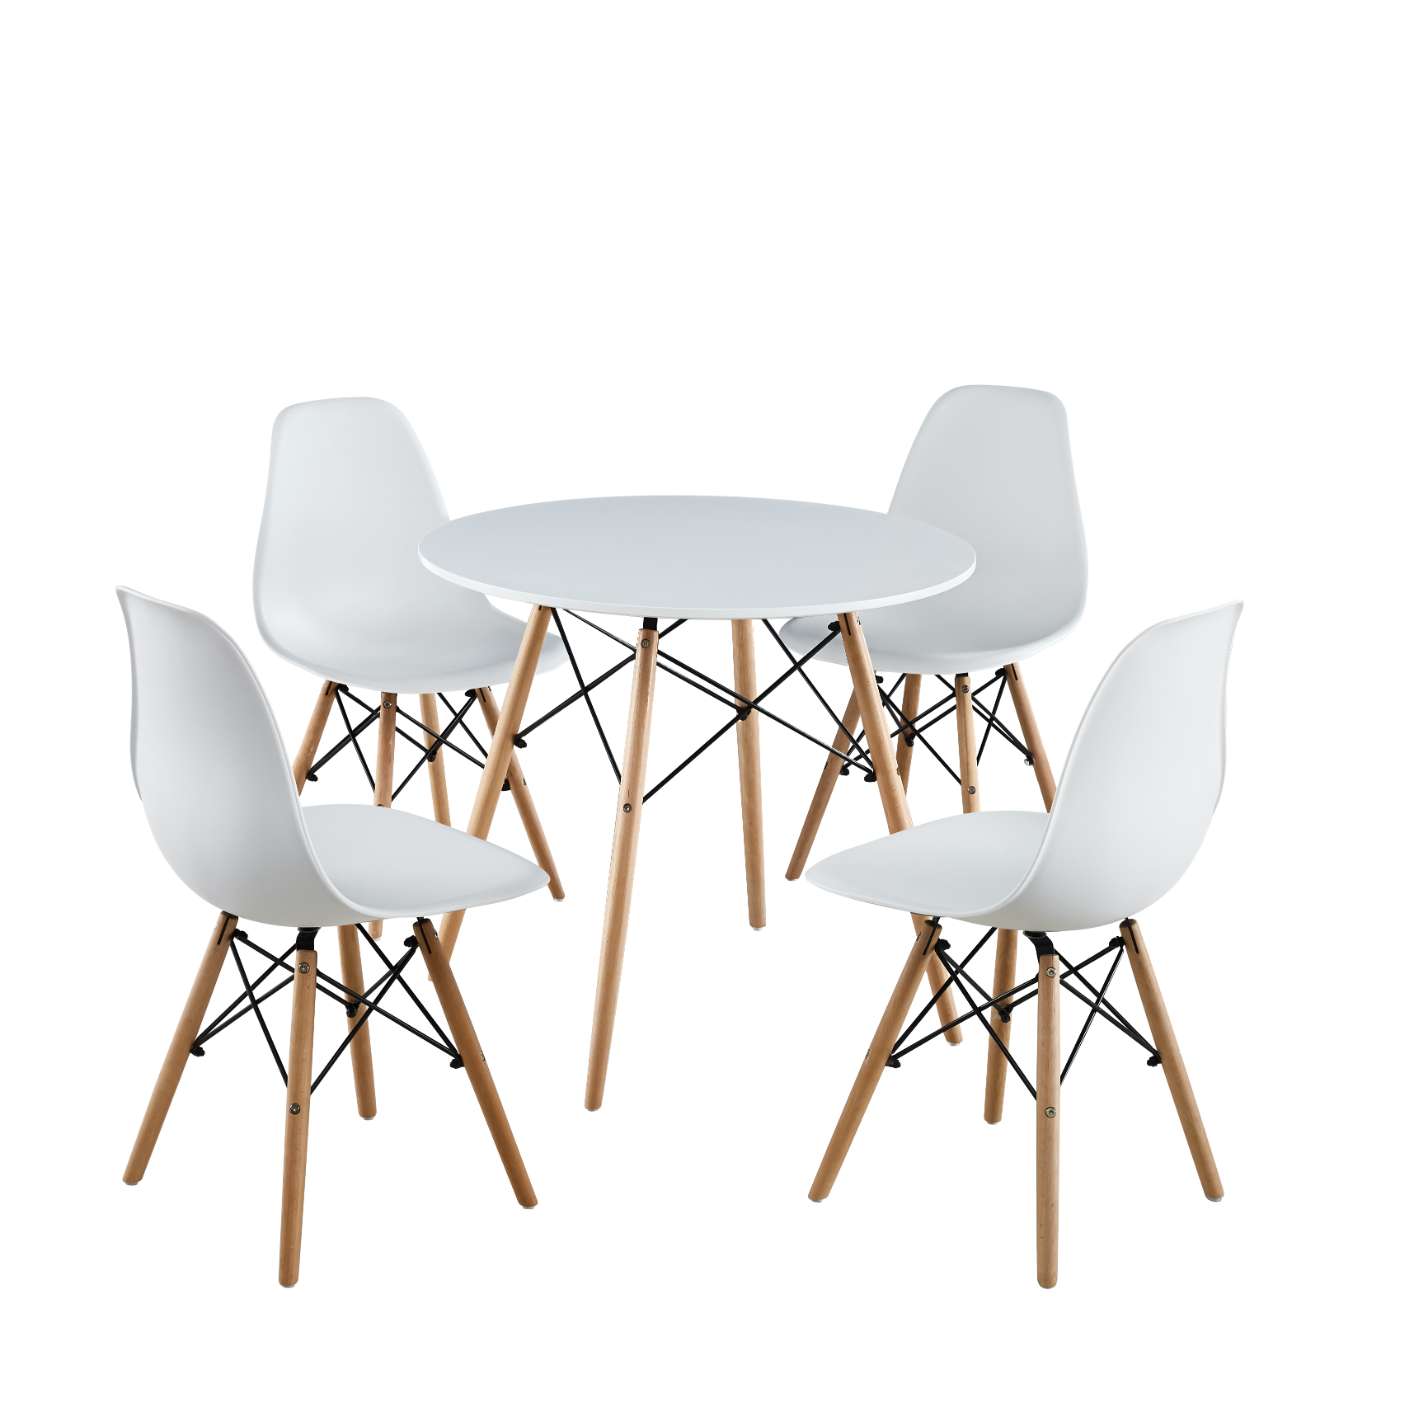 DT-902-2 Pre Assembled Modern Style Dining Table, Shell Lounge Plastic Chair with Wood Legs and Metal Wires for Kitchen, Dining, Bedroom, Living Room Side Set of 1 Table, 4 Chairs
